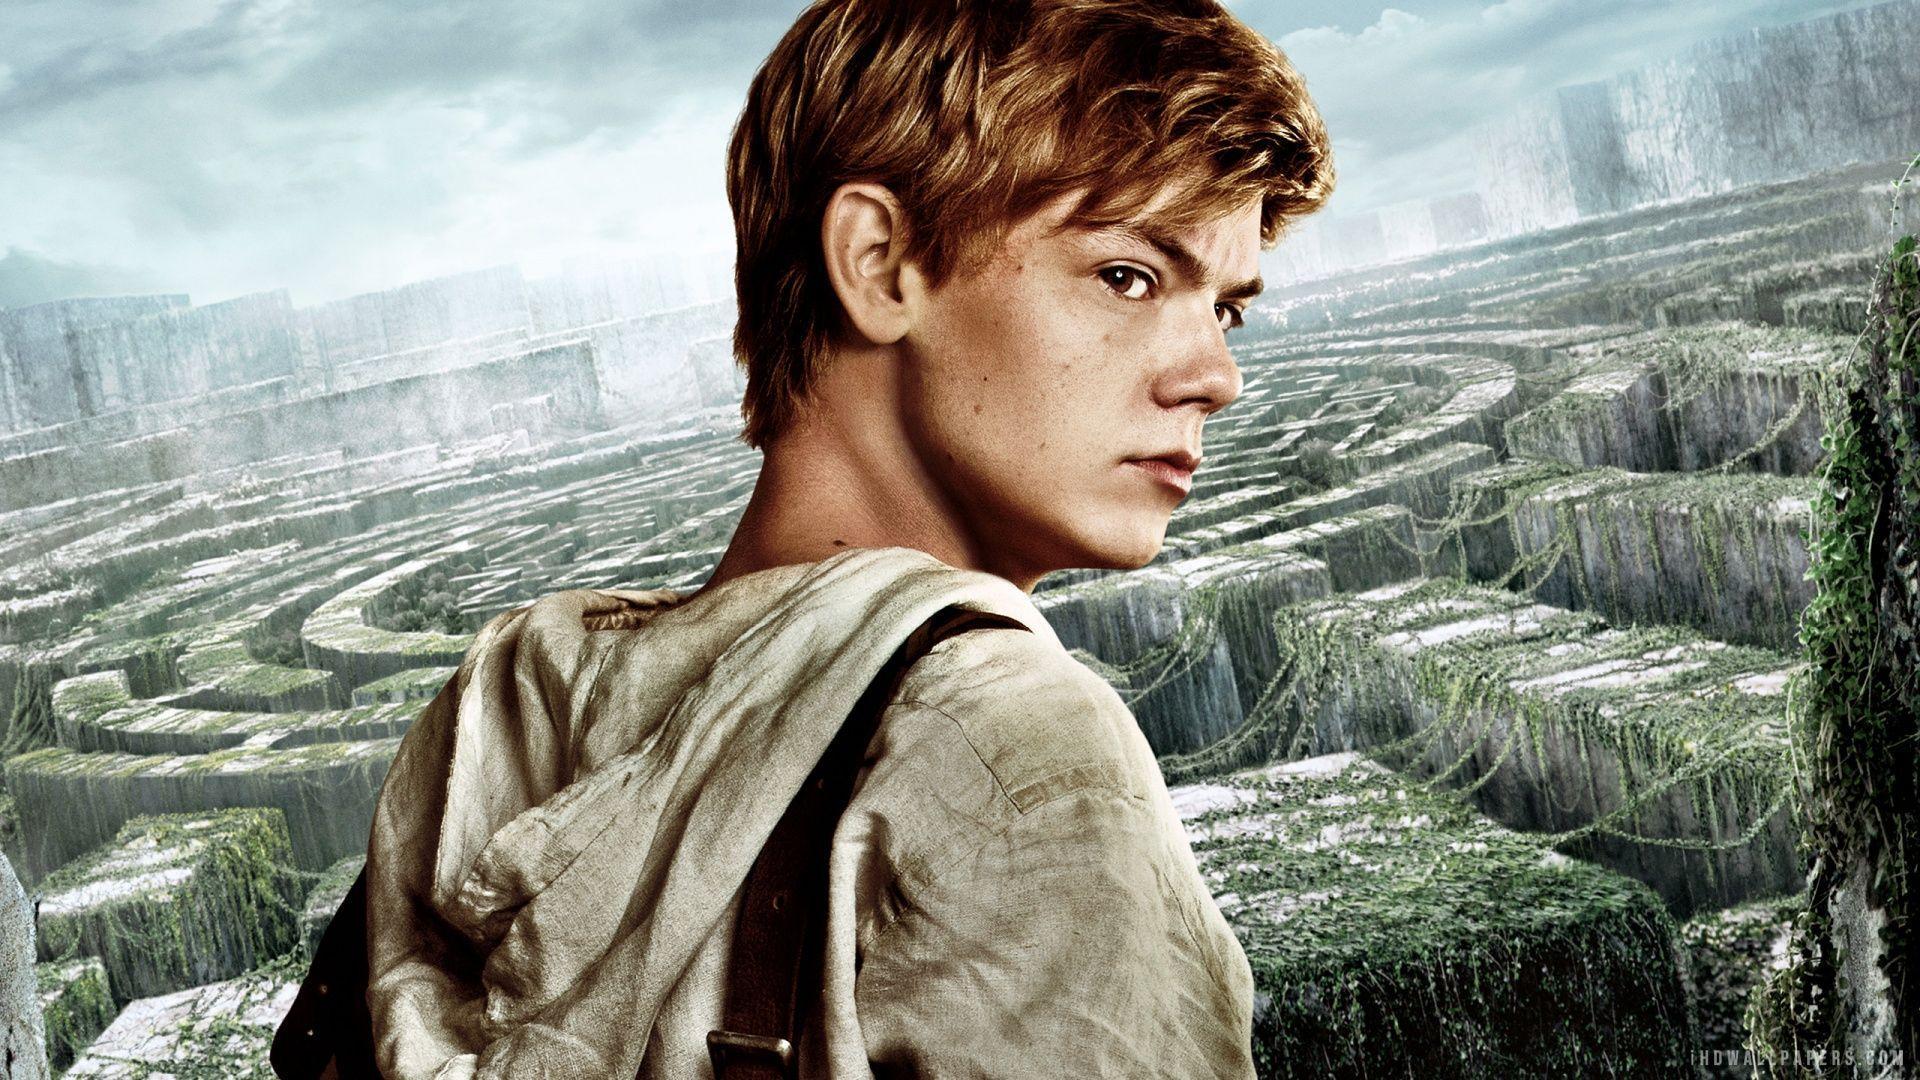 Thomas Brodie Sangster in The Maze Runner HD Wallpaper